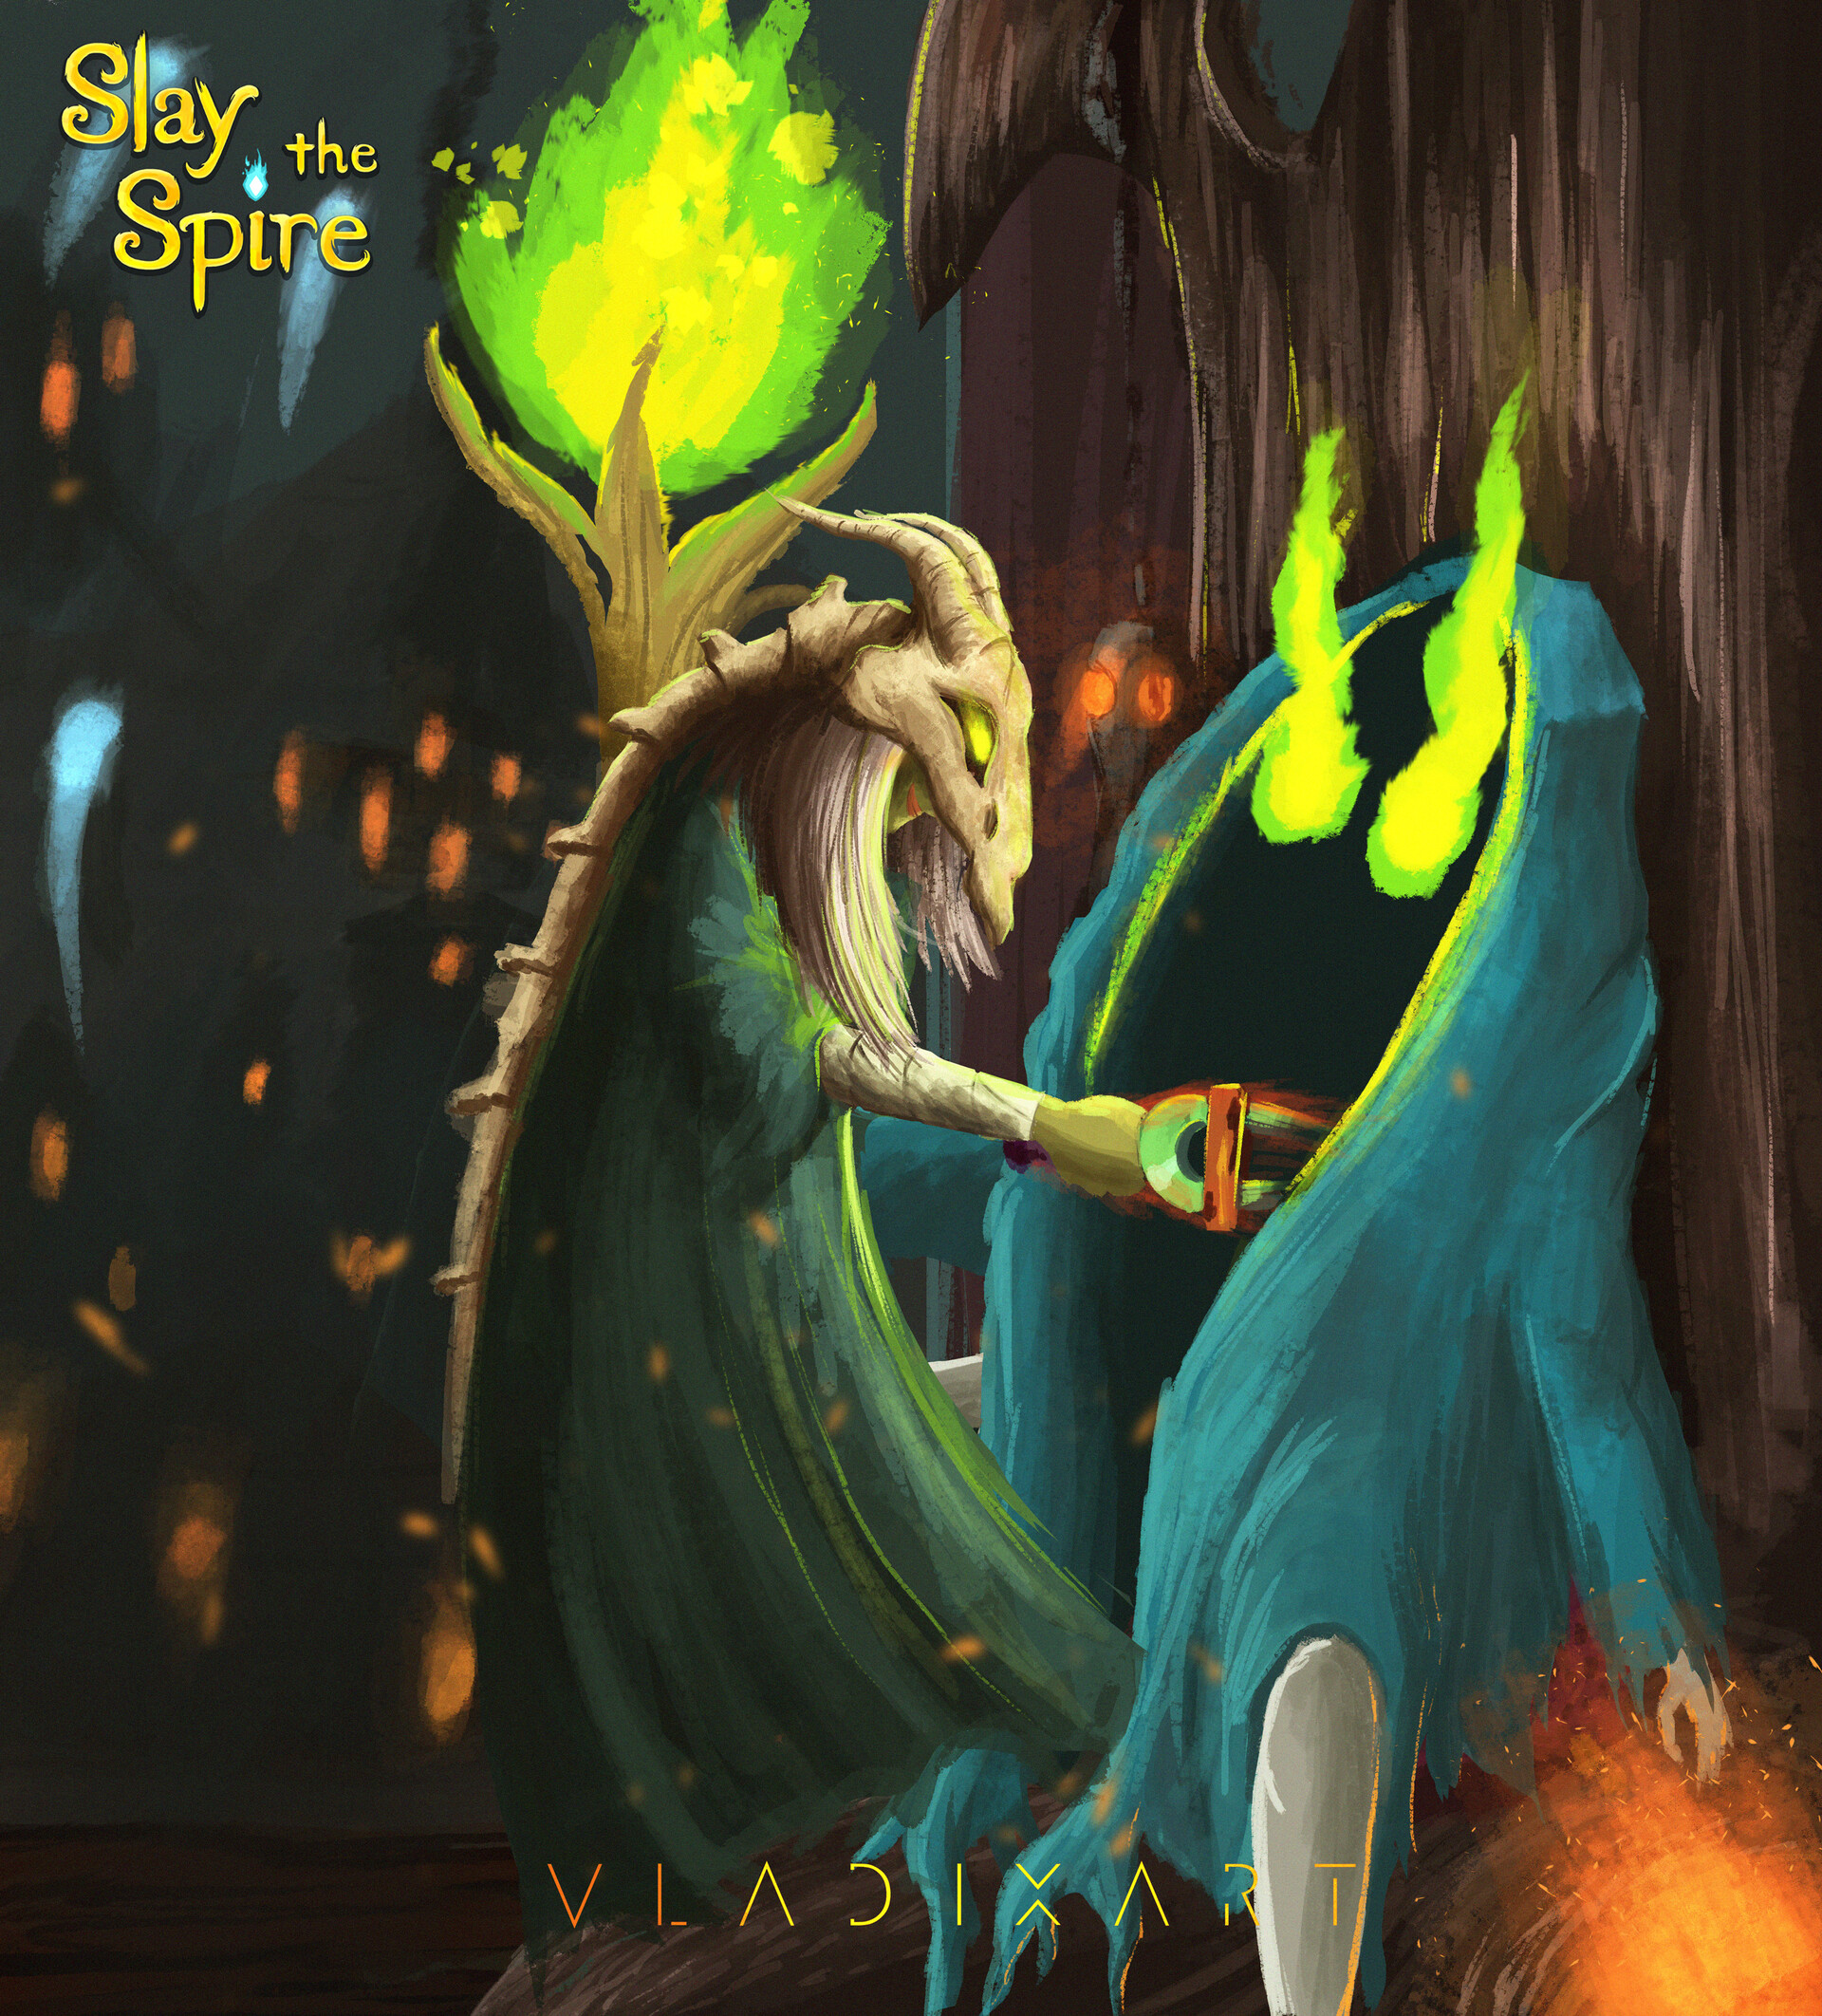 I got all crazy around the game Slay the Spire, it's just masterpiece....